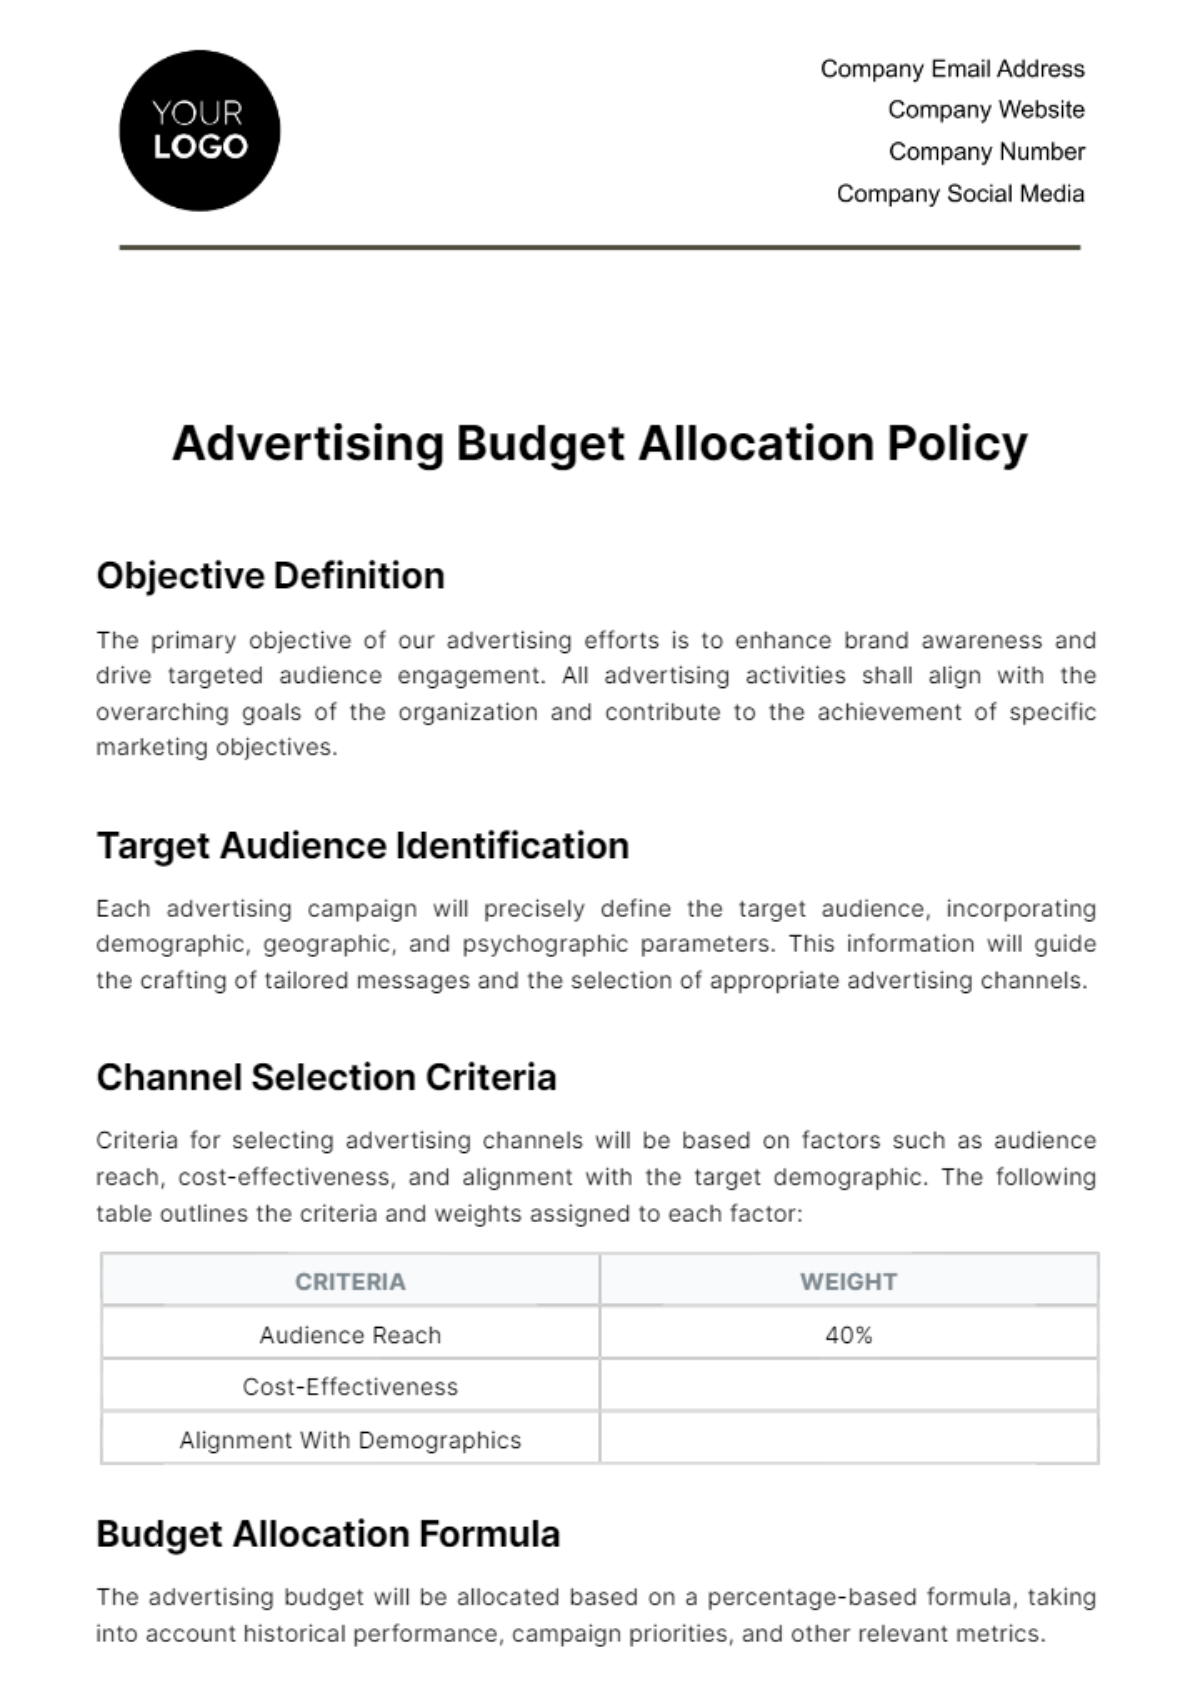 Advertising Budget Allocation Policy Template